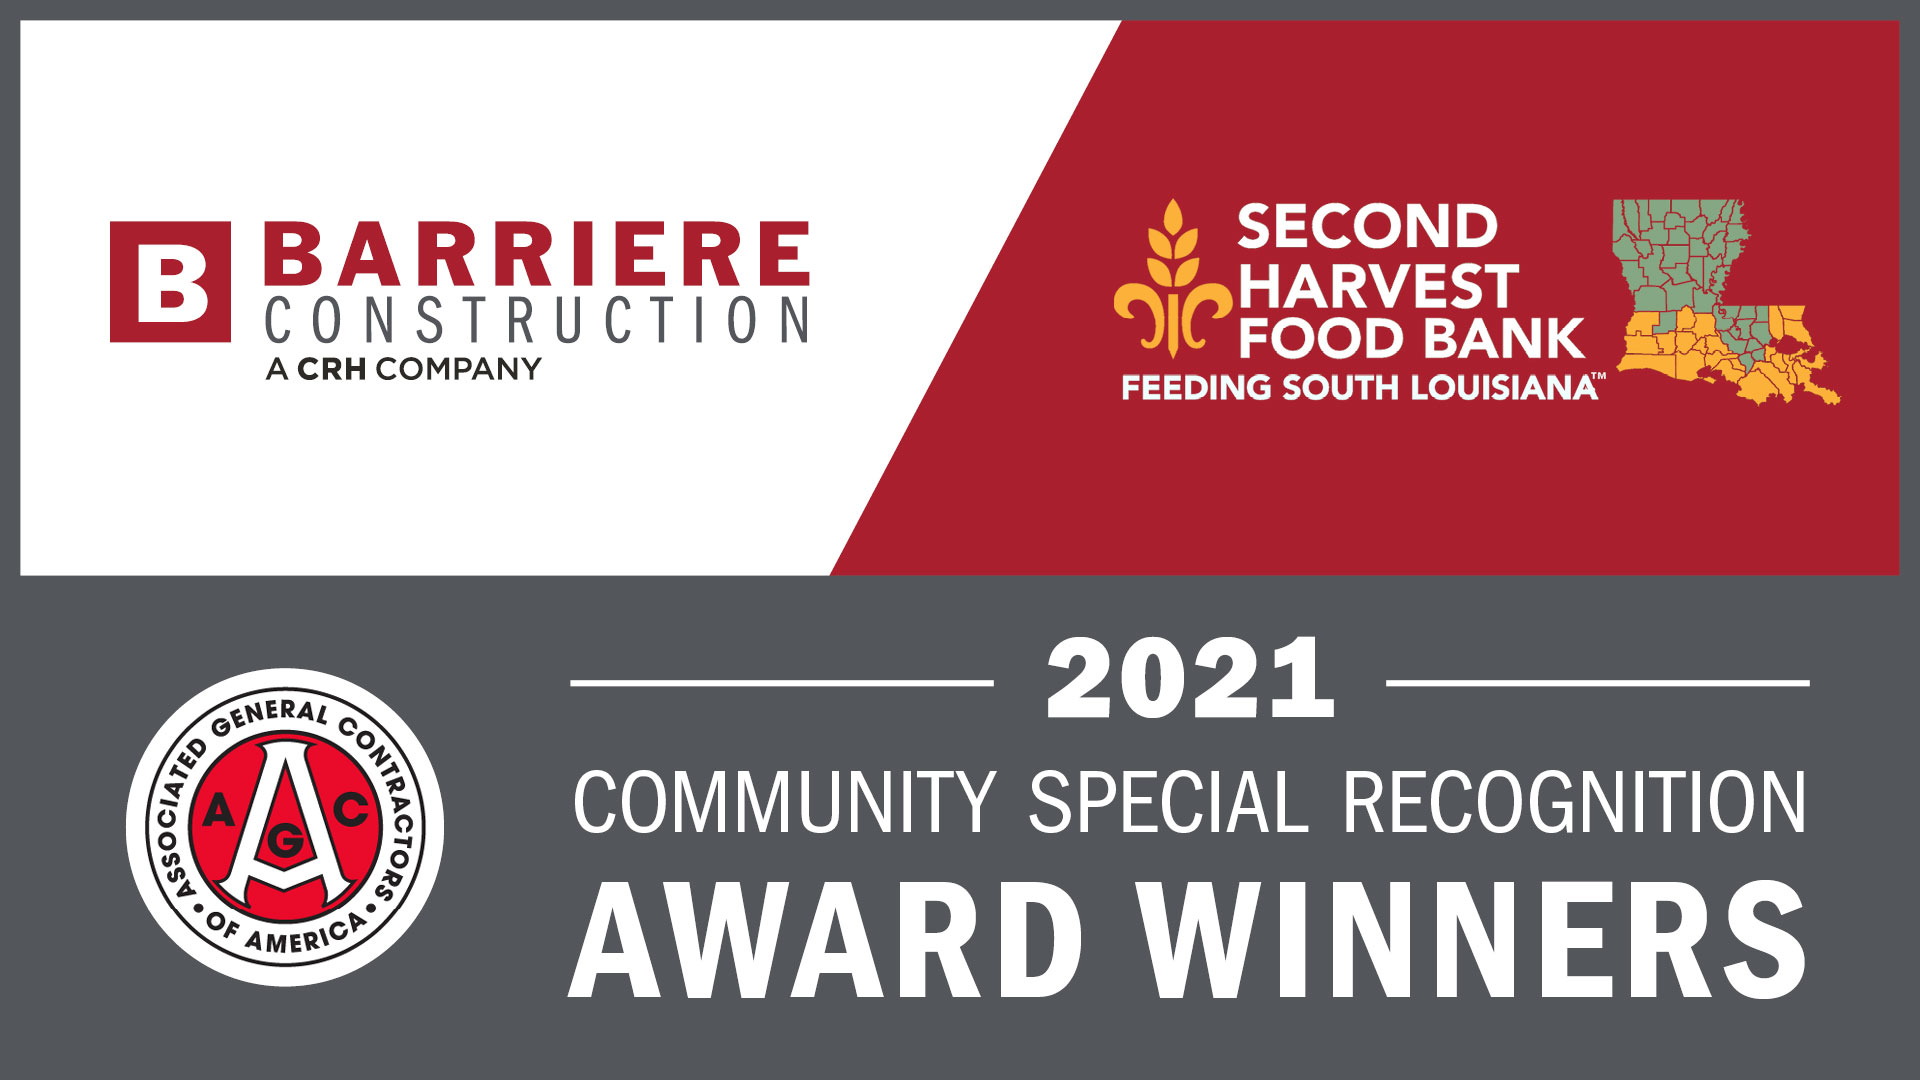 Barriere Recognized for Community Partnership Award Winners 2021